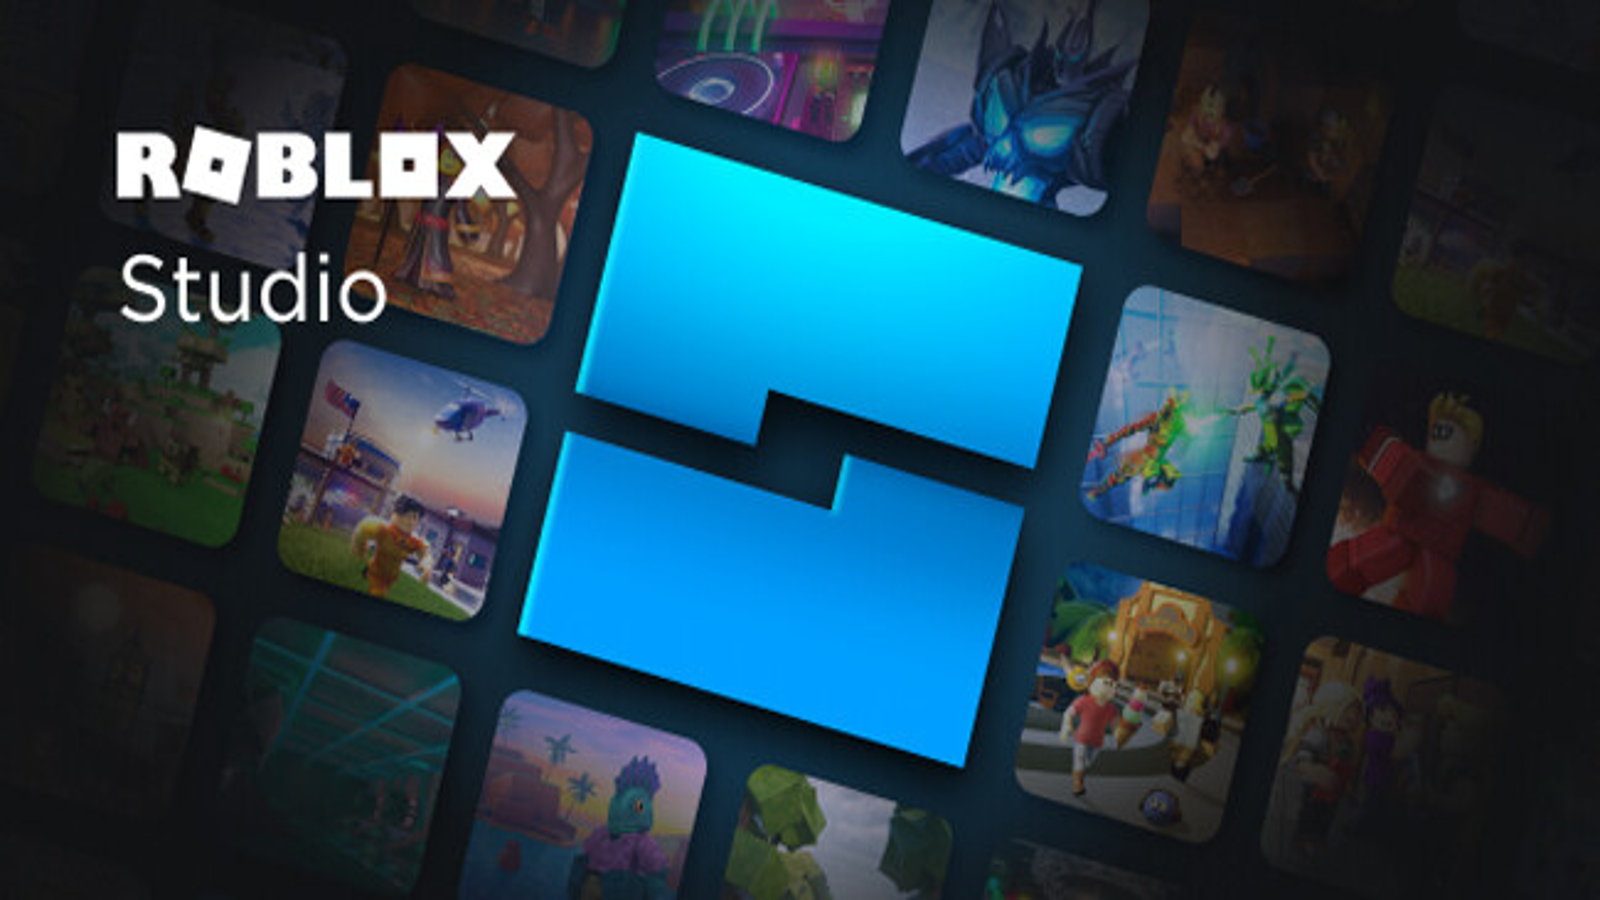 Roblox Studio Mobile - How to Install Roblox Studio on Android APK